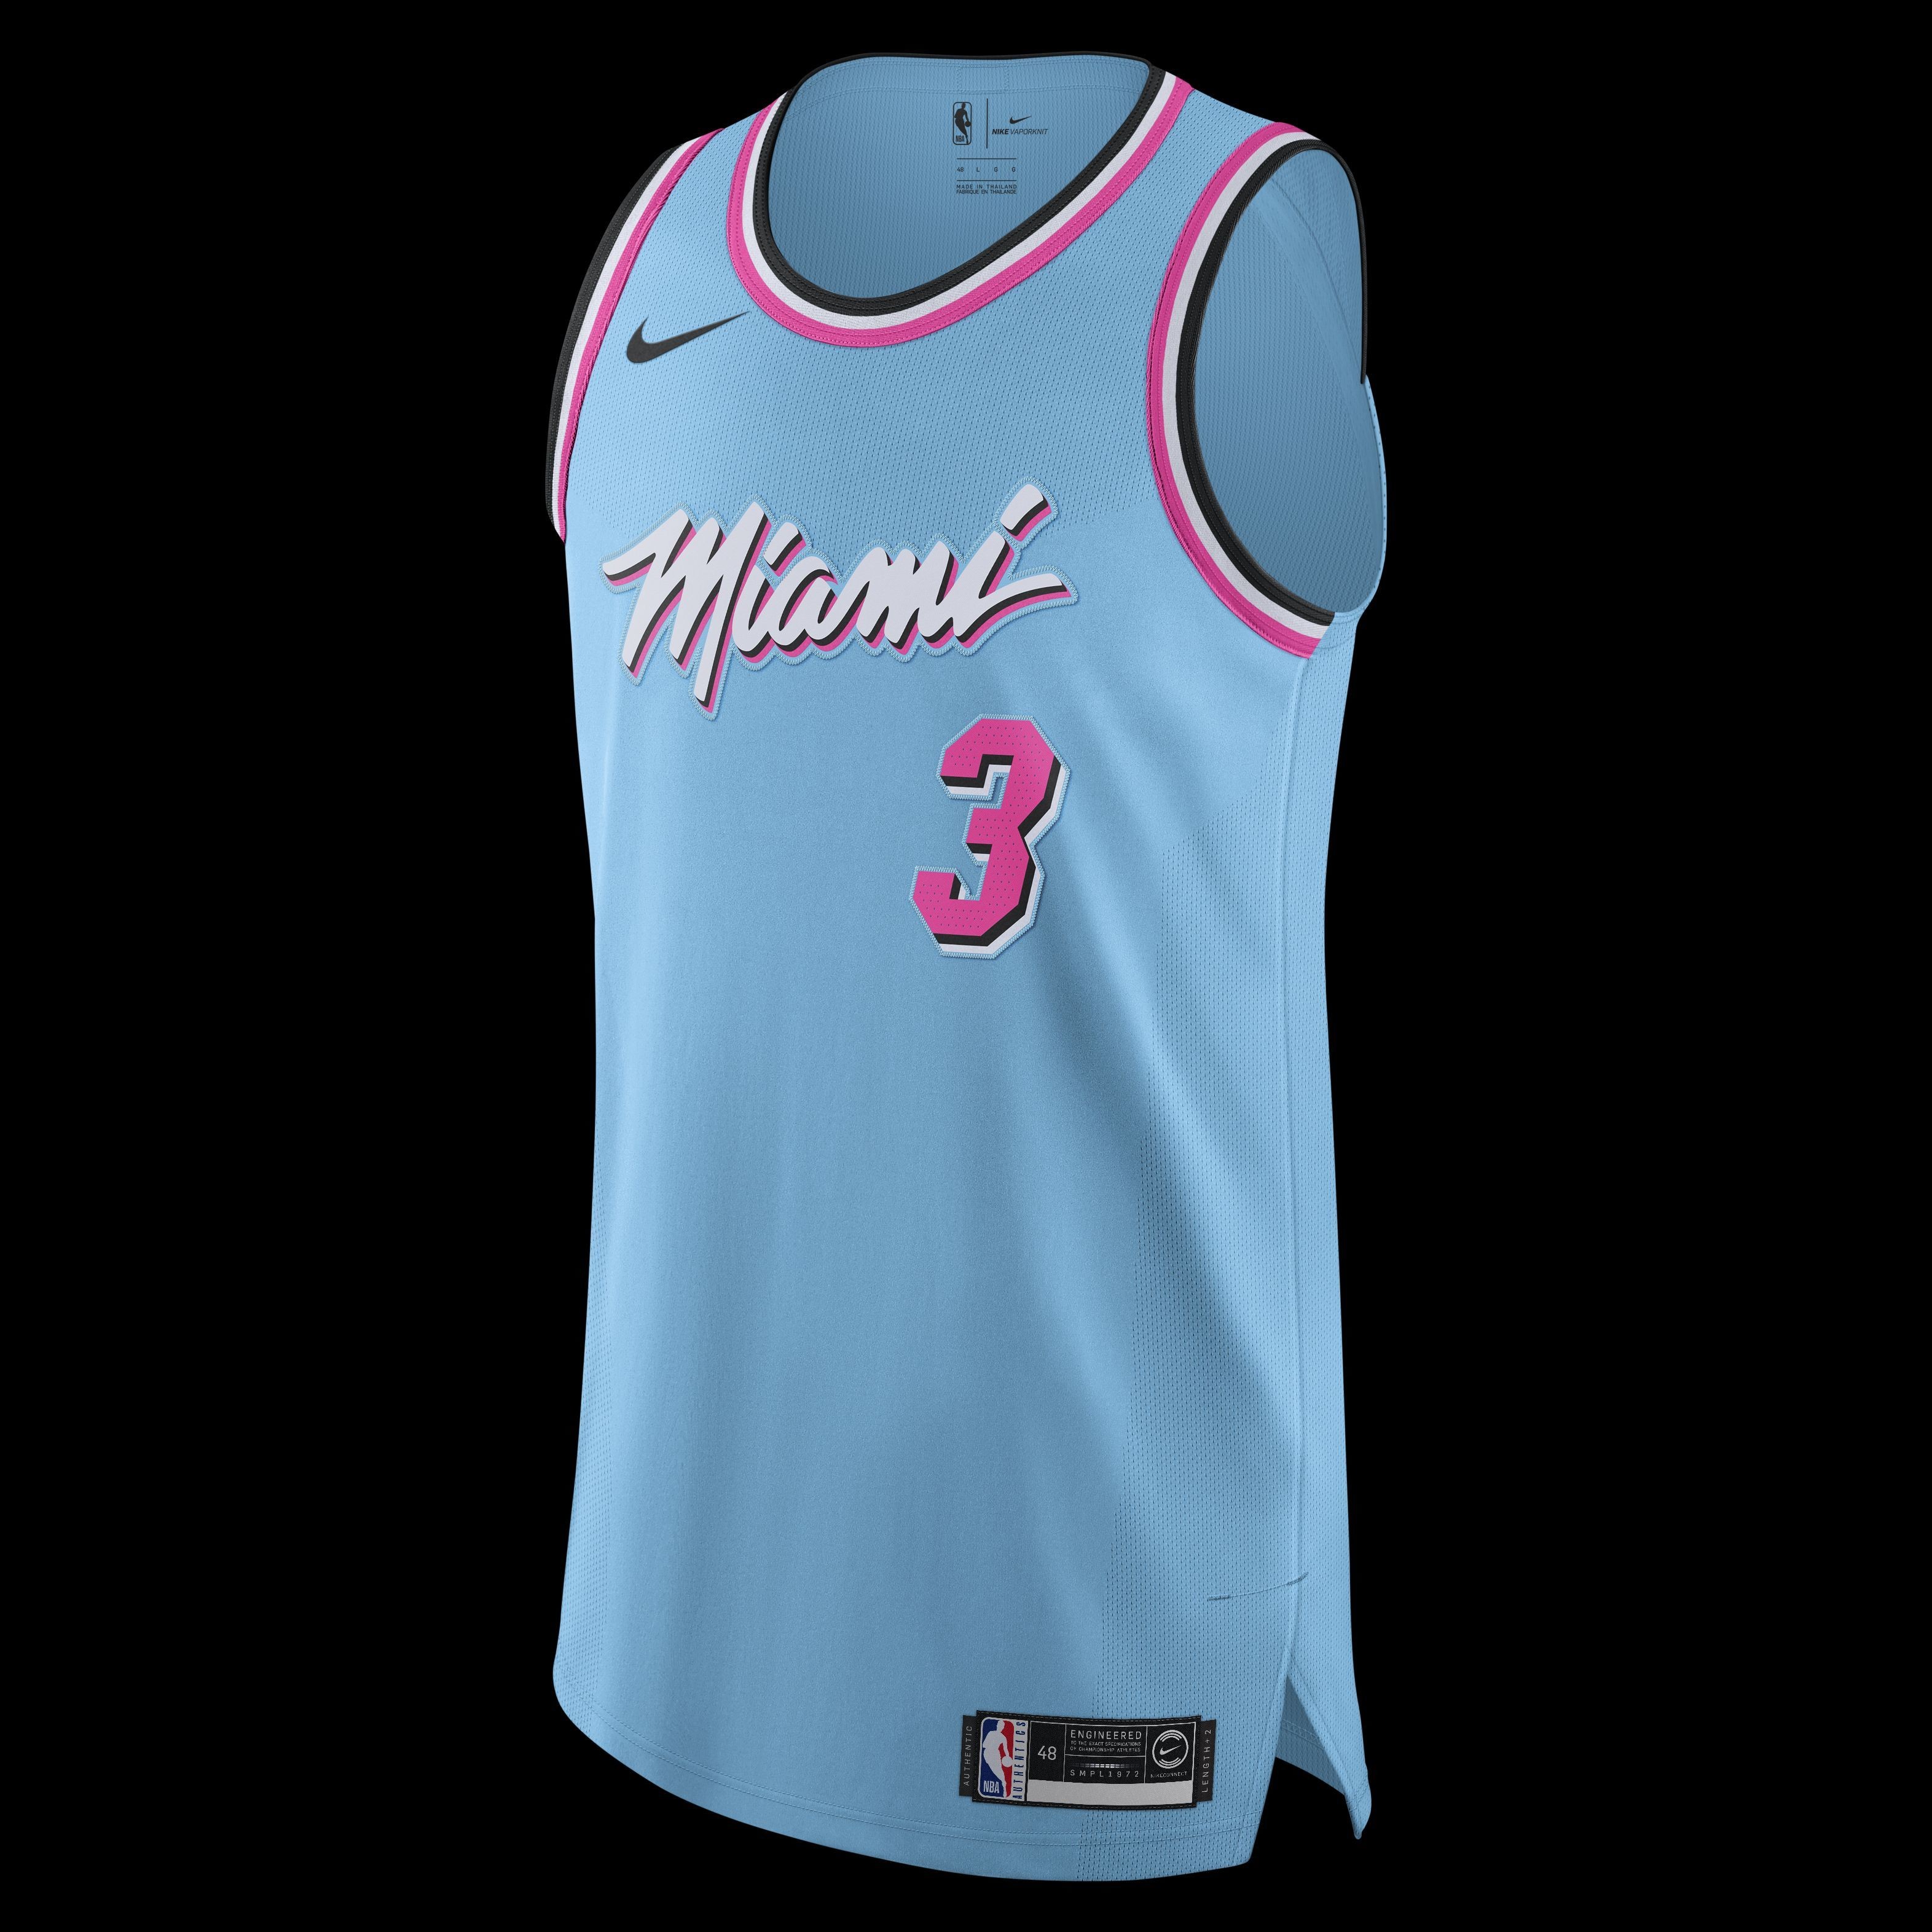 Get your Miami Heat City Edition Jerseys now